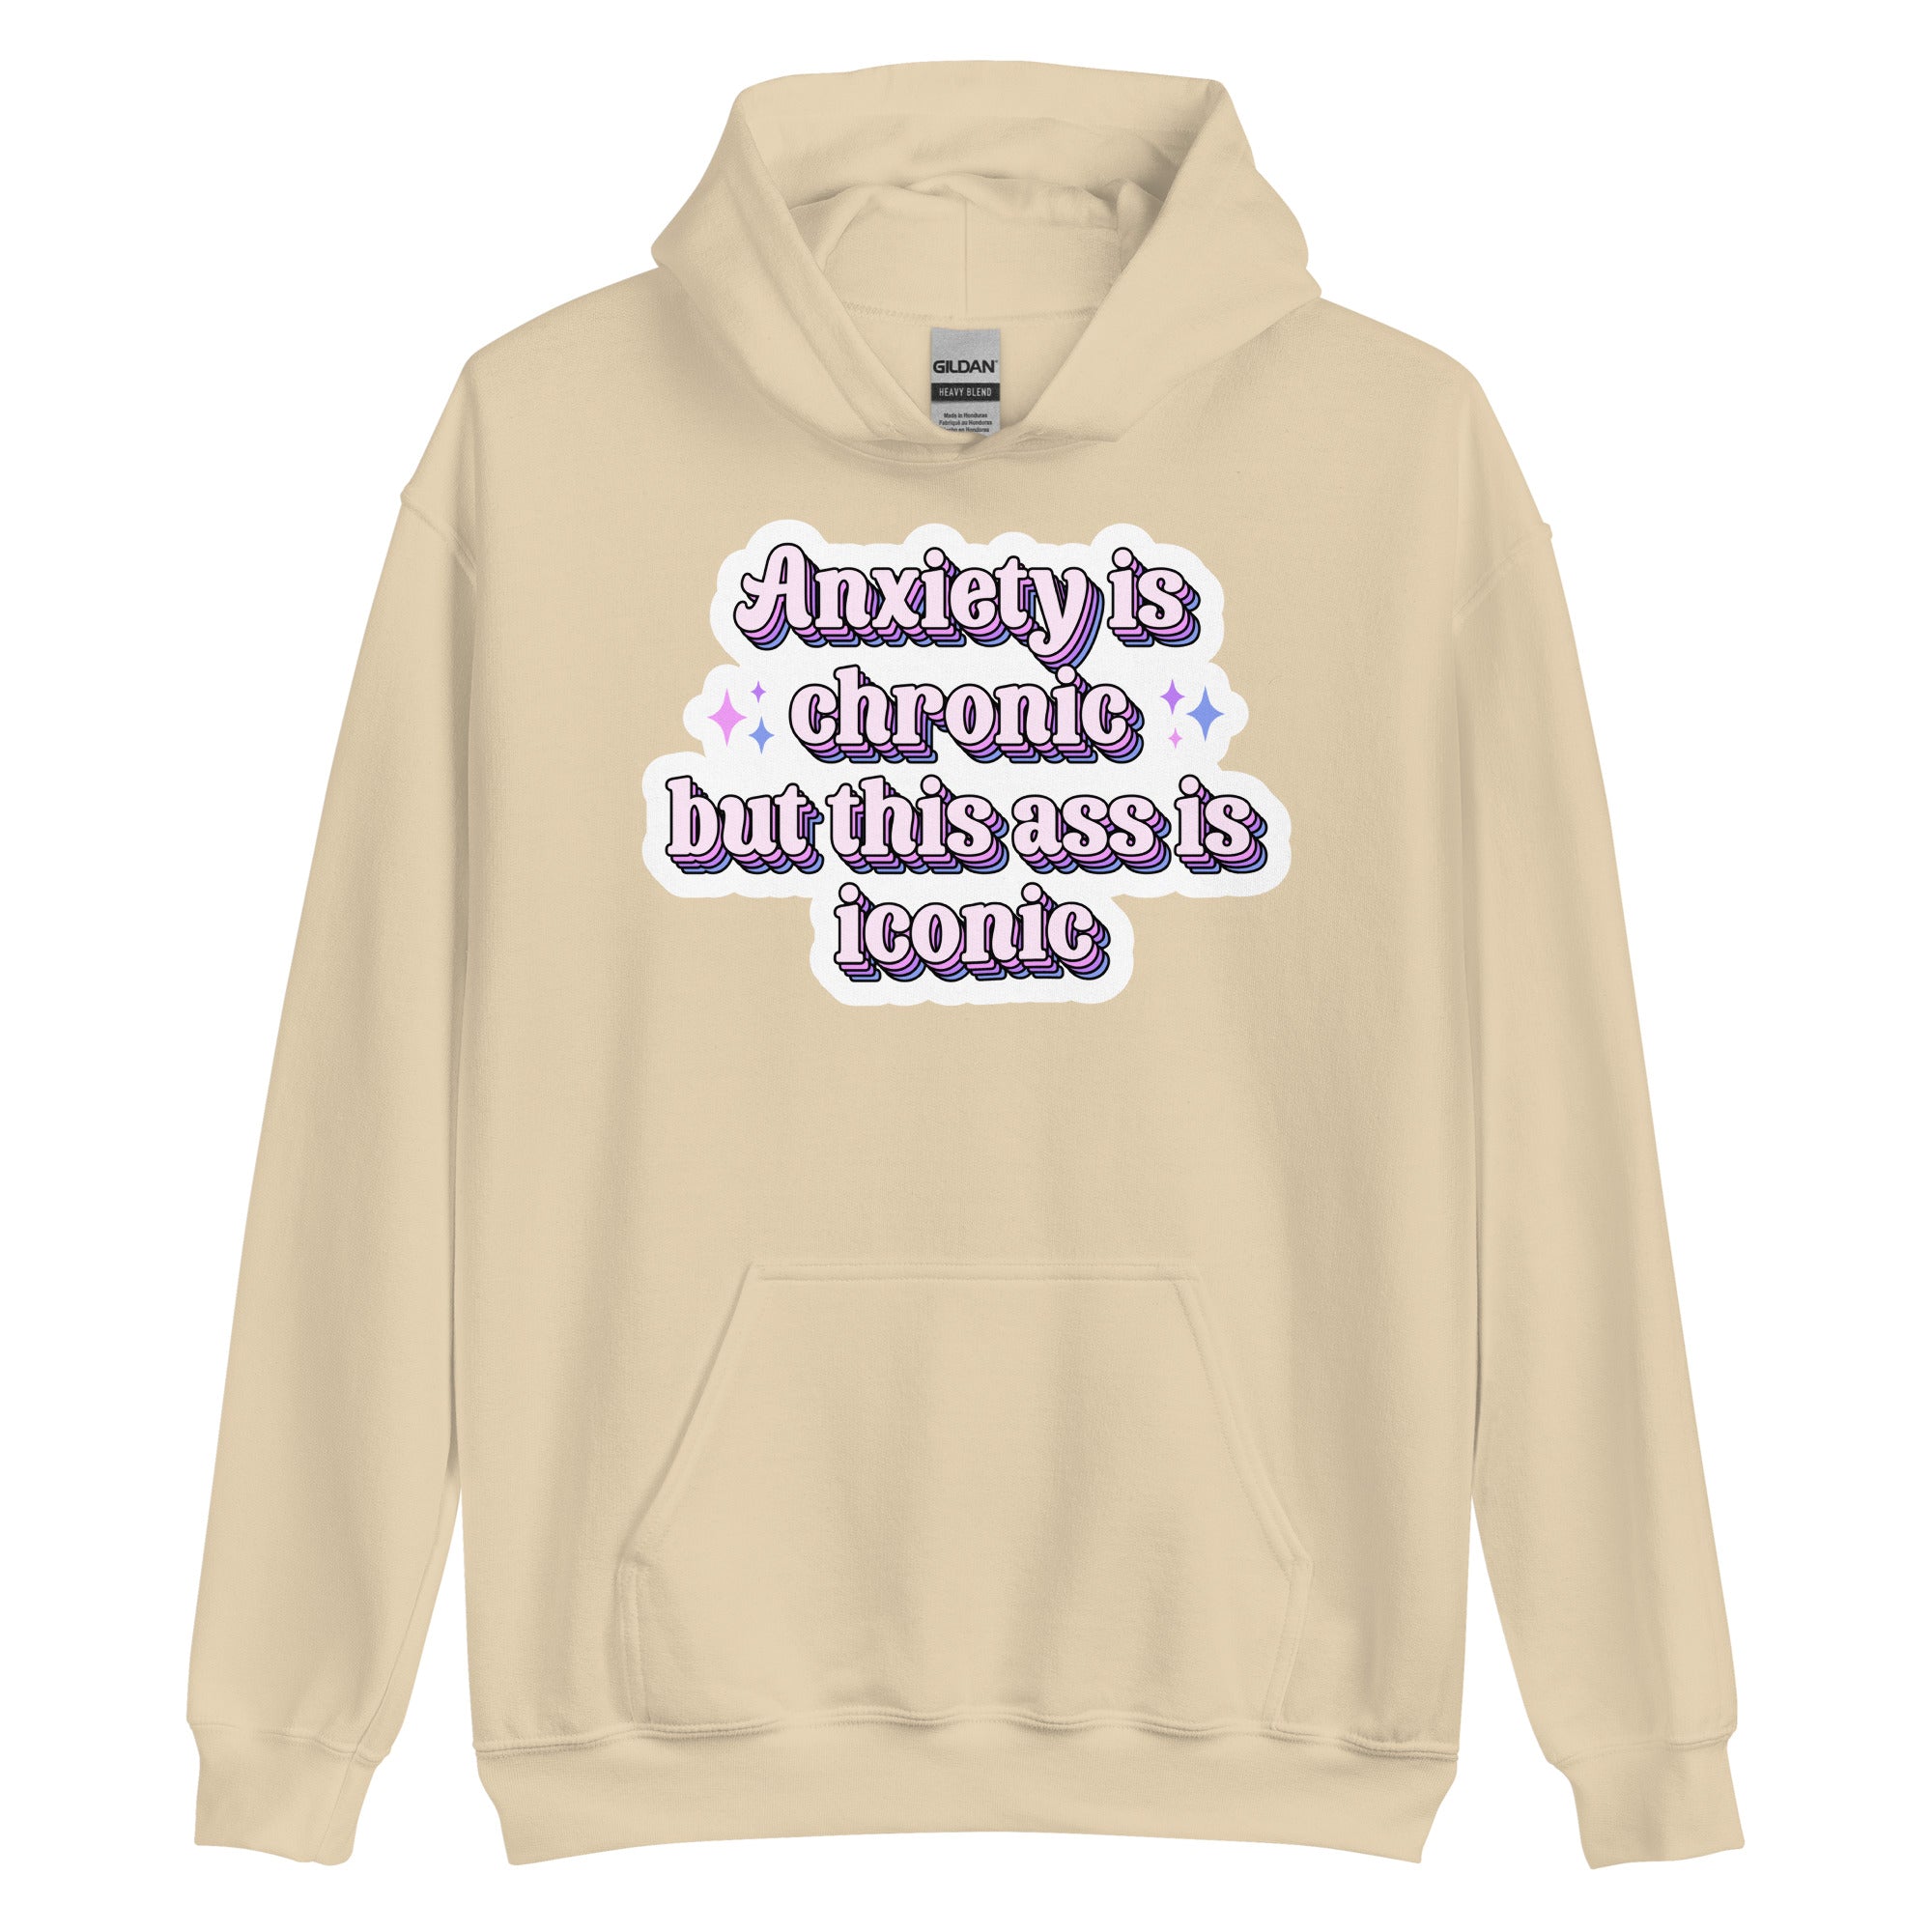 Anxiety is Chronic but this ass is iconic Unisex Sweat Shirt